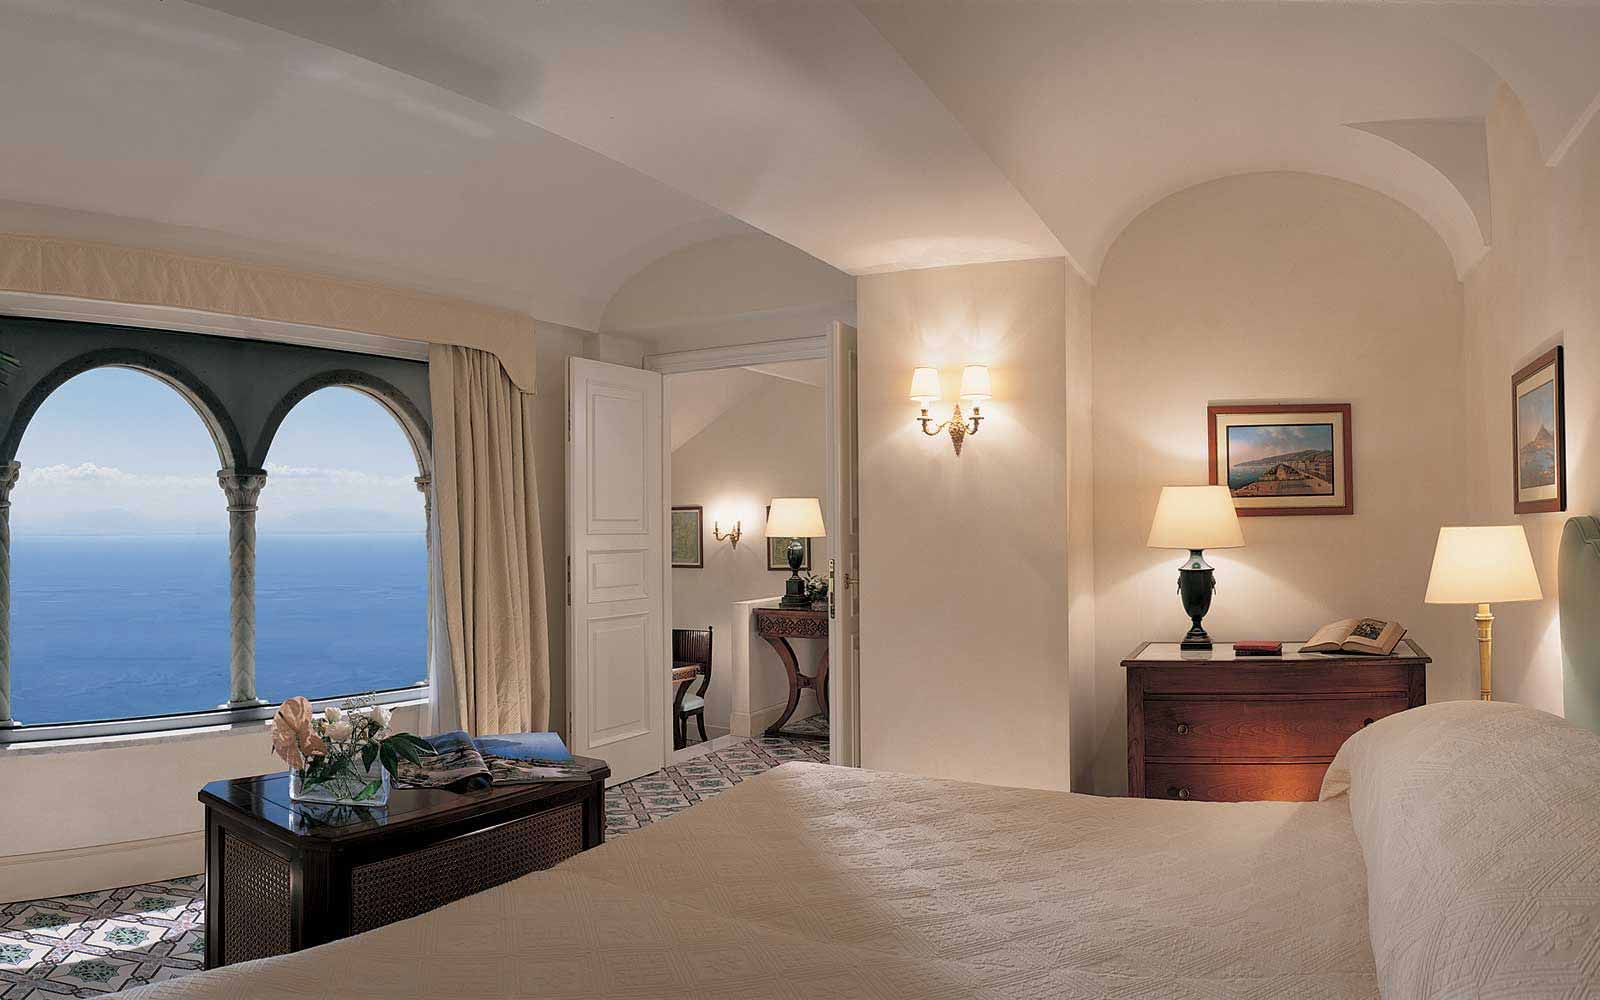 Deluxe Suite at Belmond Hotel Caruso